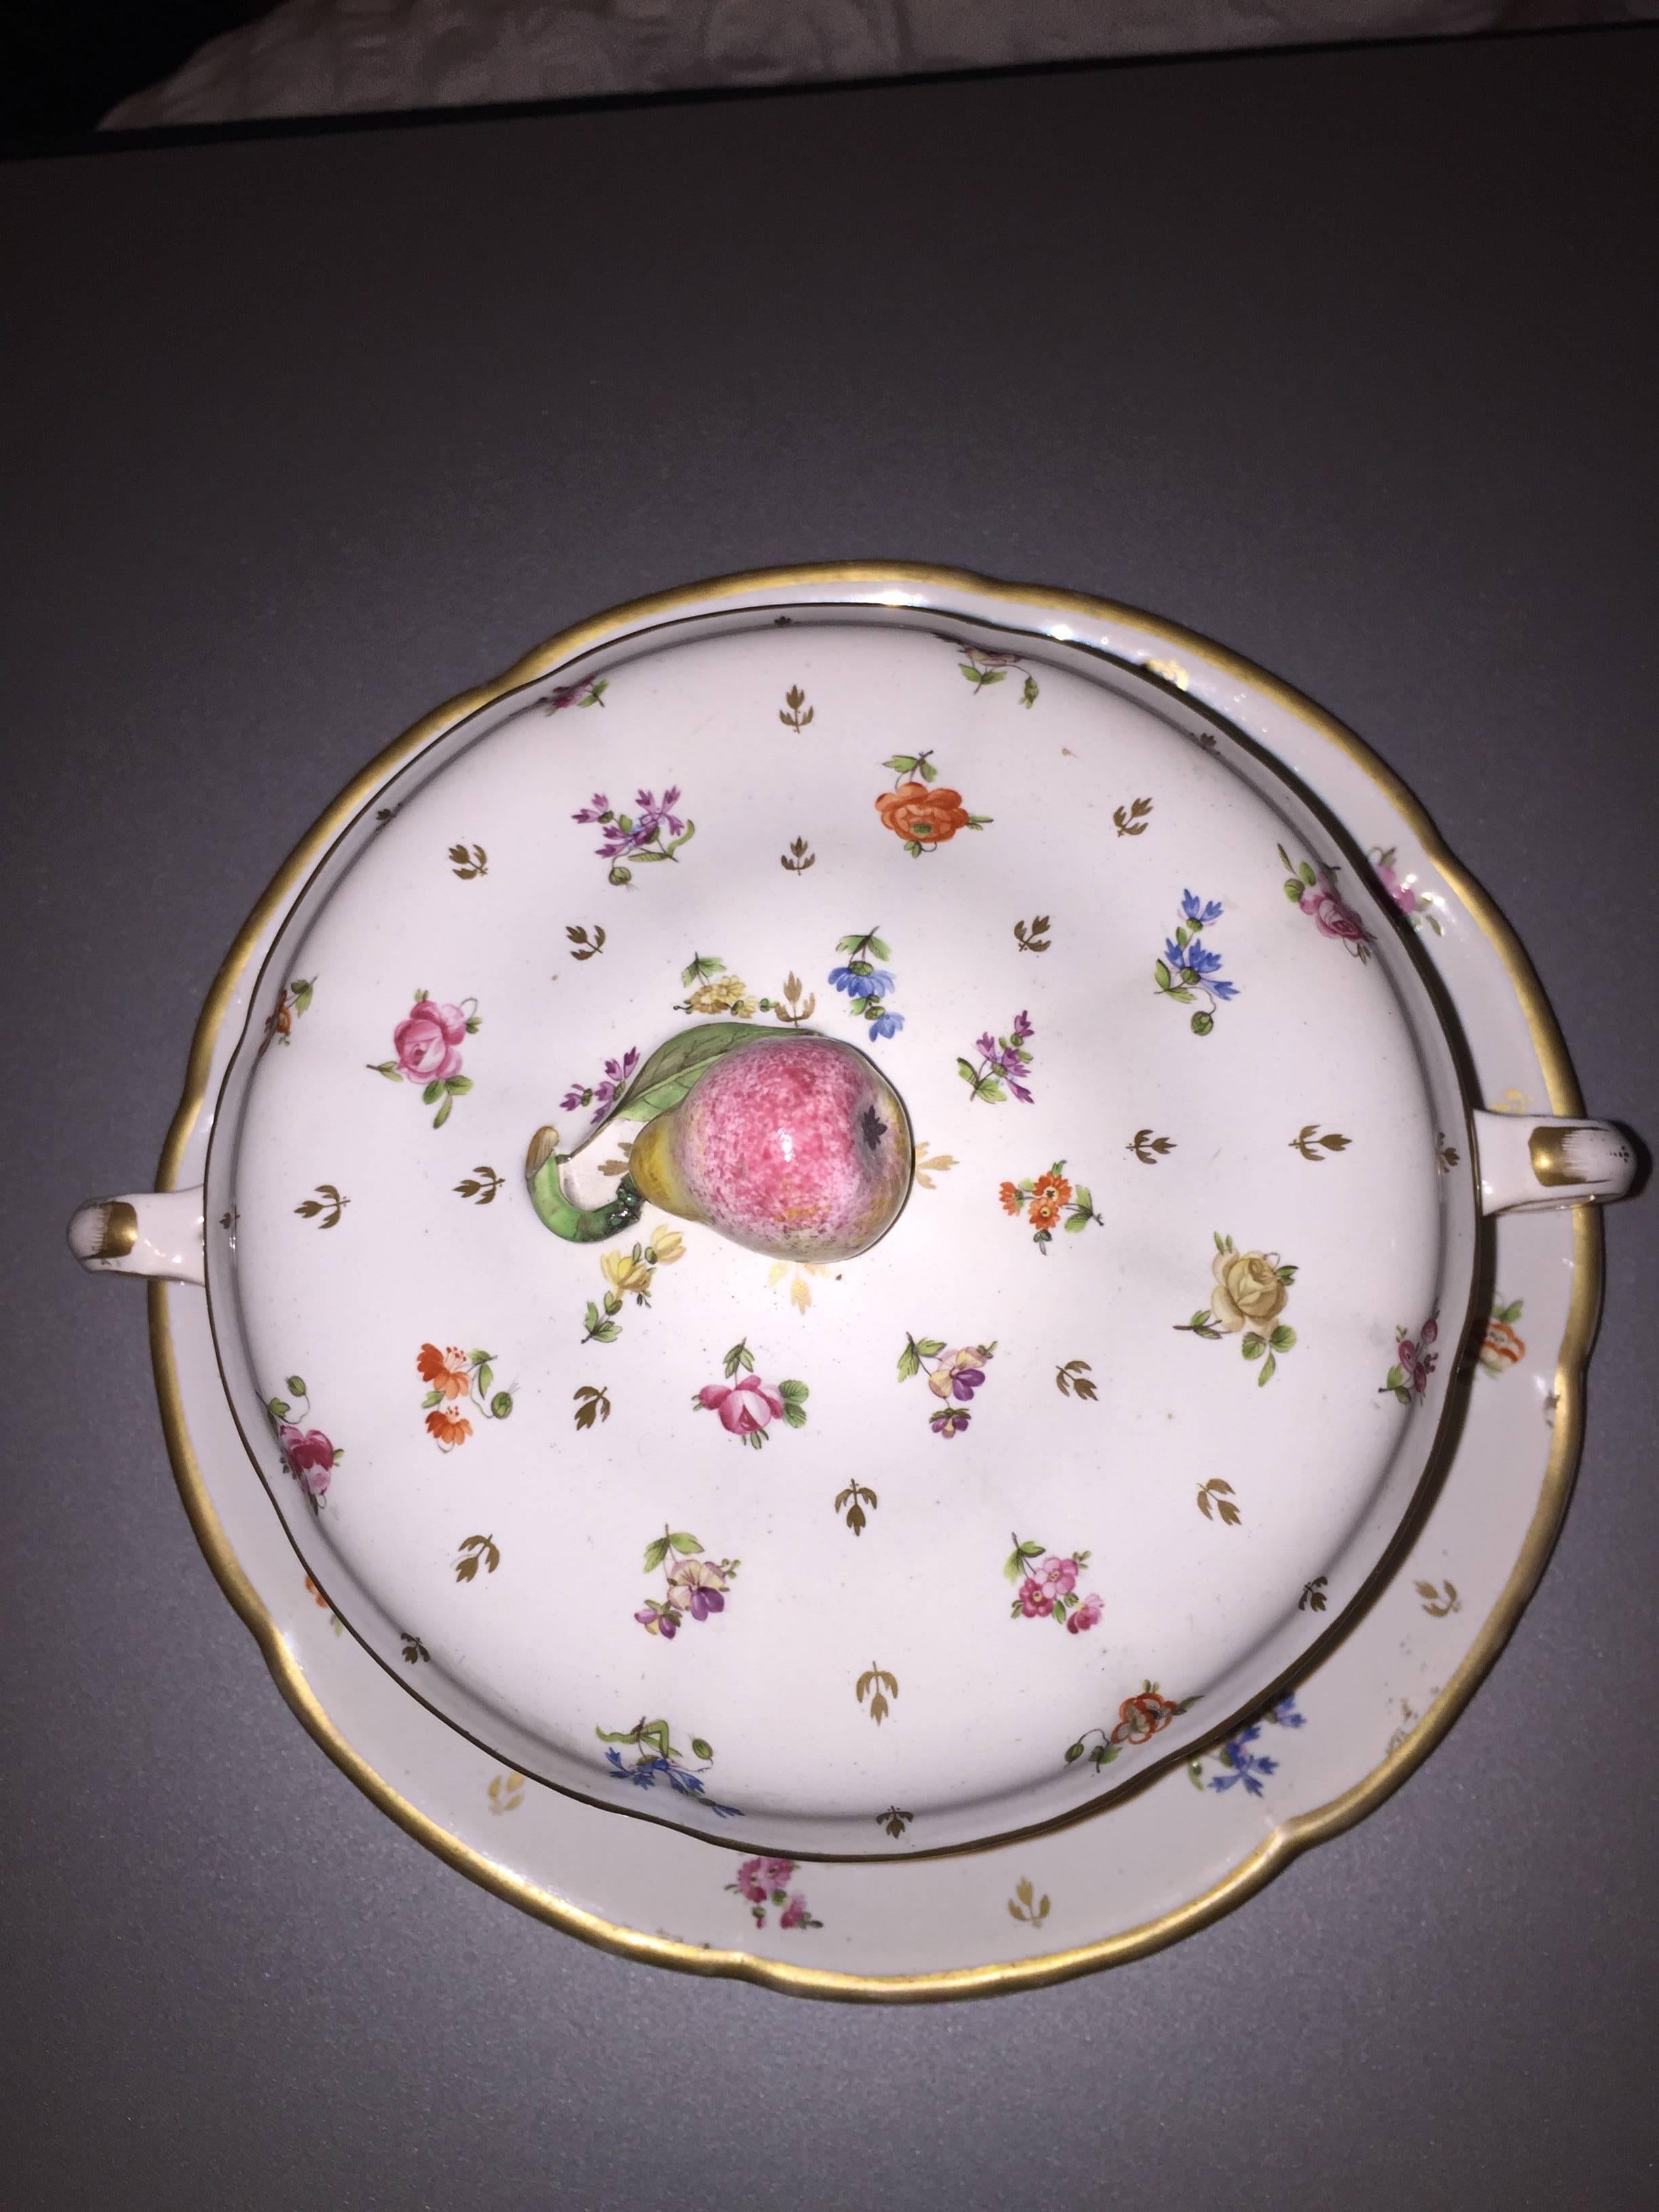 Bowl covered with broth and display of the late 19th century. Polychrome flowers.